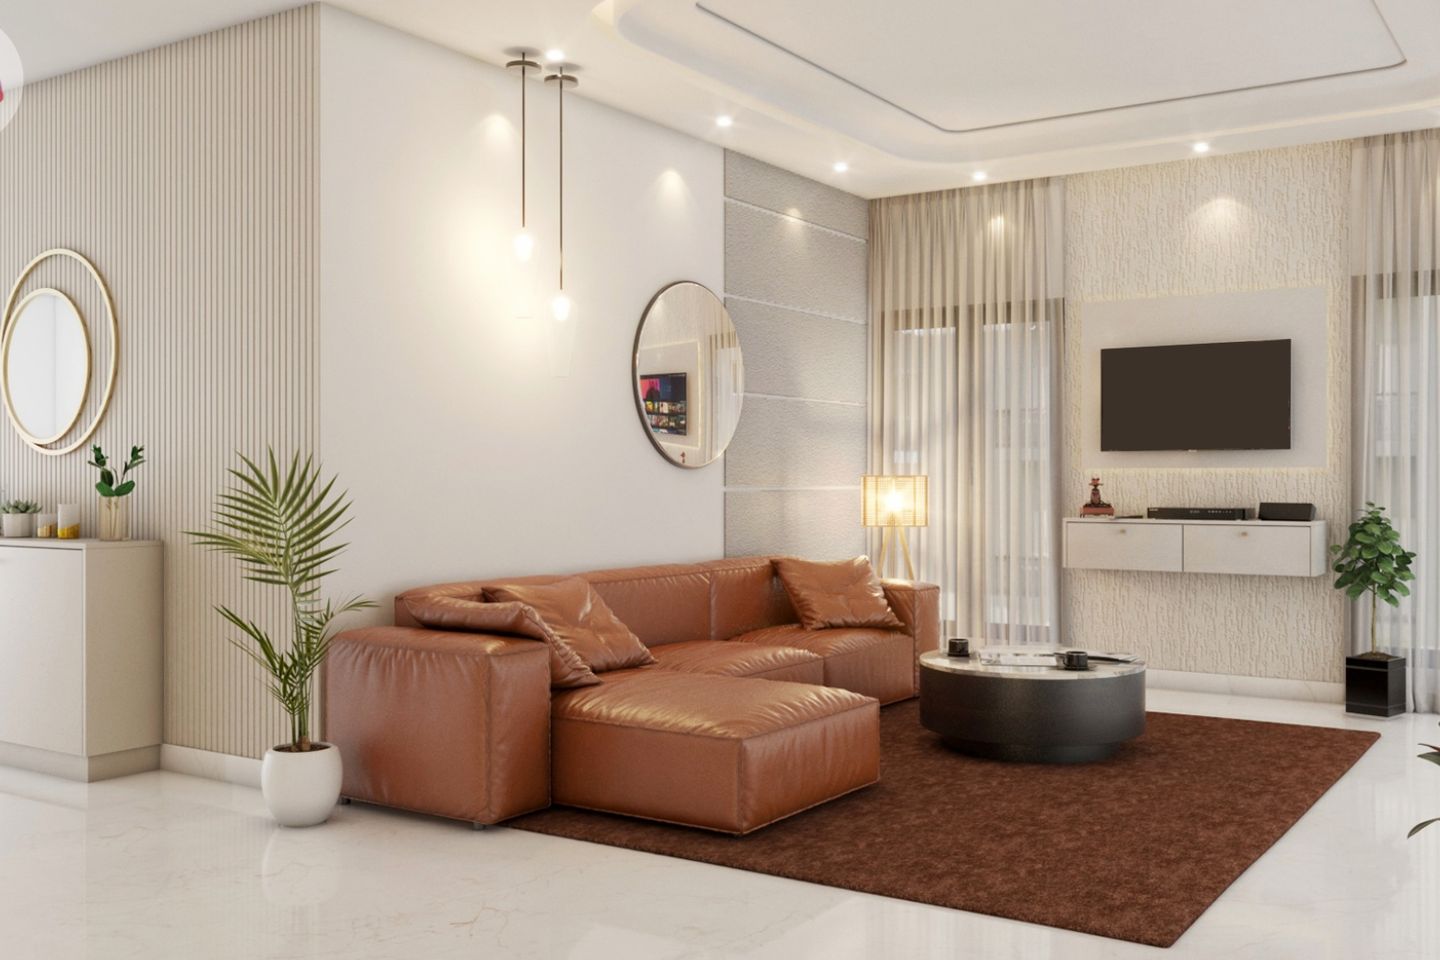 14x13 Ft  Living Room Design With L-Shaped Faux Leather Brown Sofa And Textured Walls - Livspace